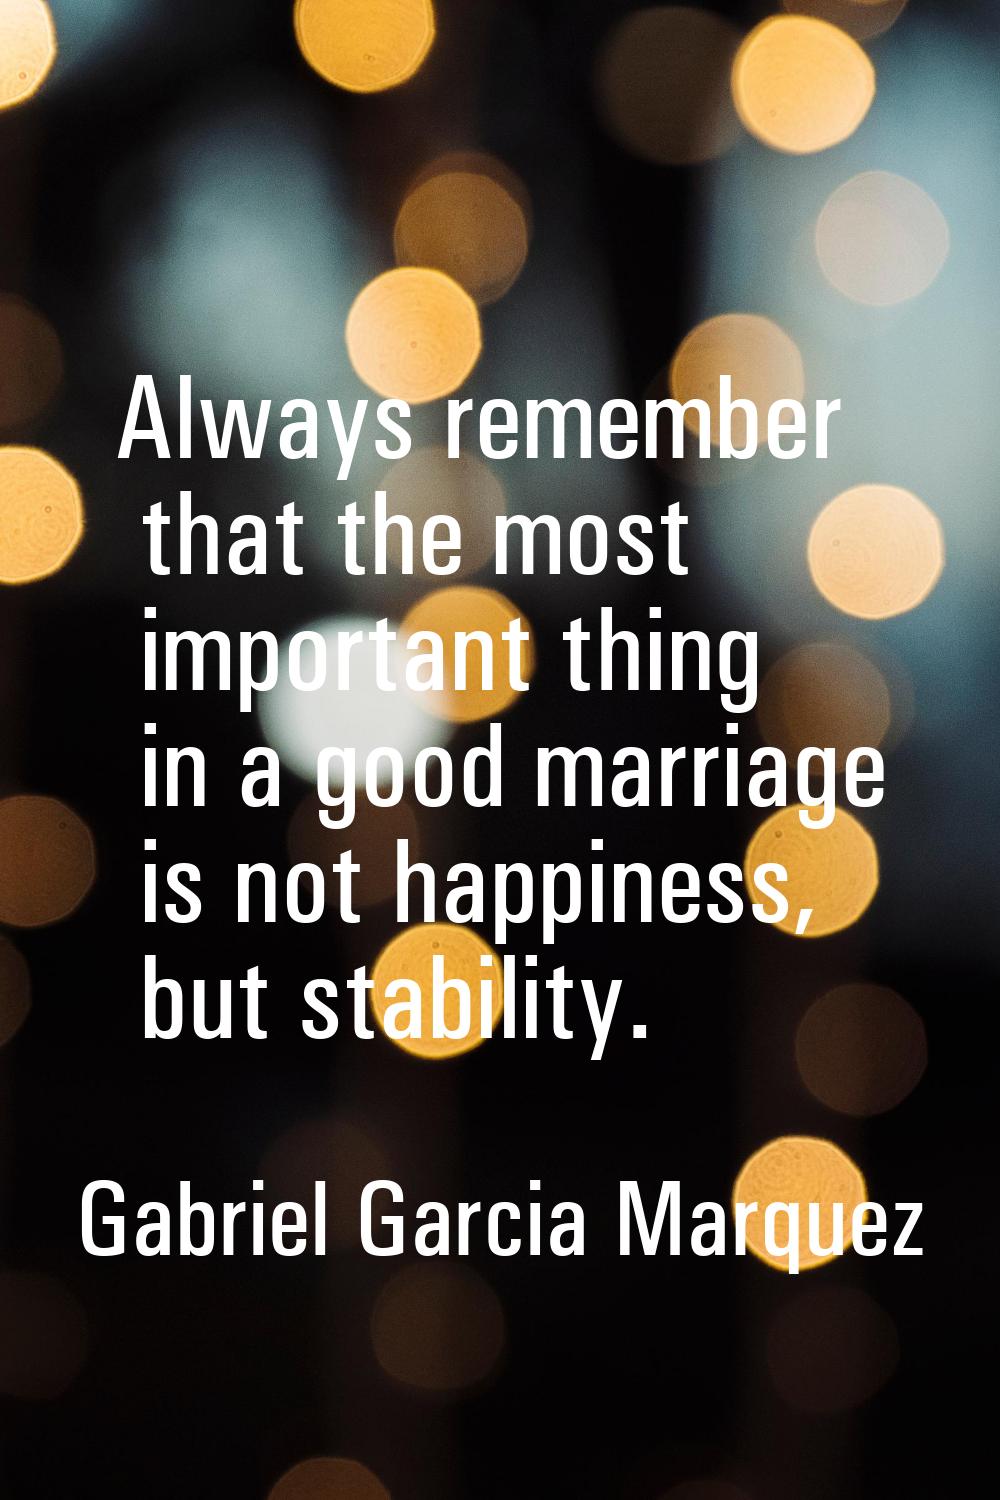 Always remember that the most important thing in a good marriage is not happiness, but stability.